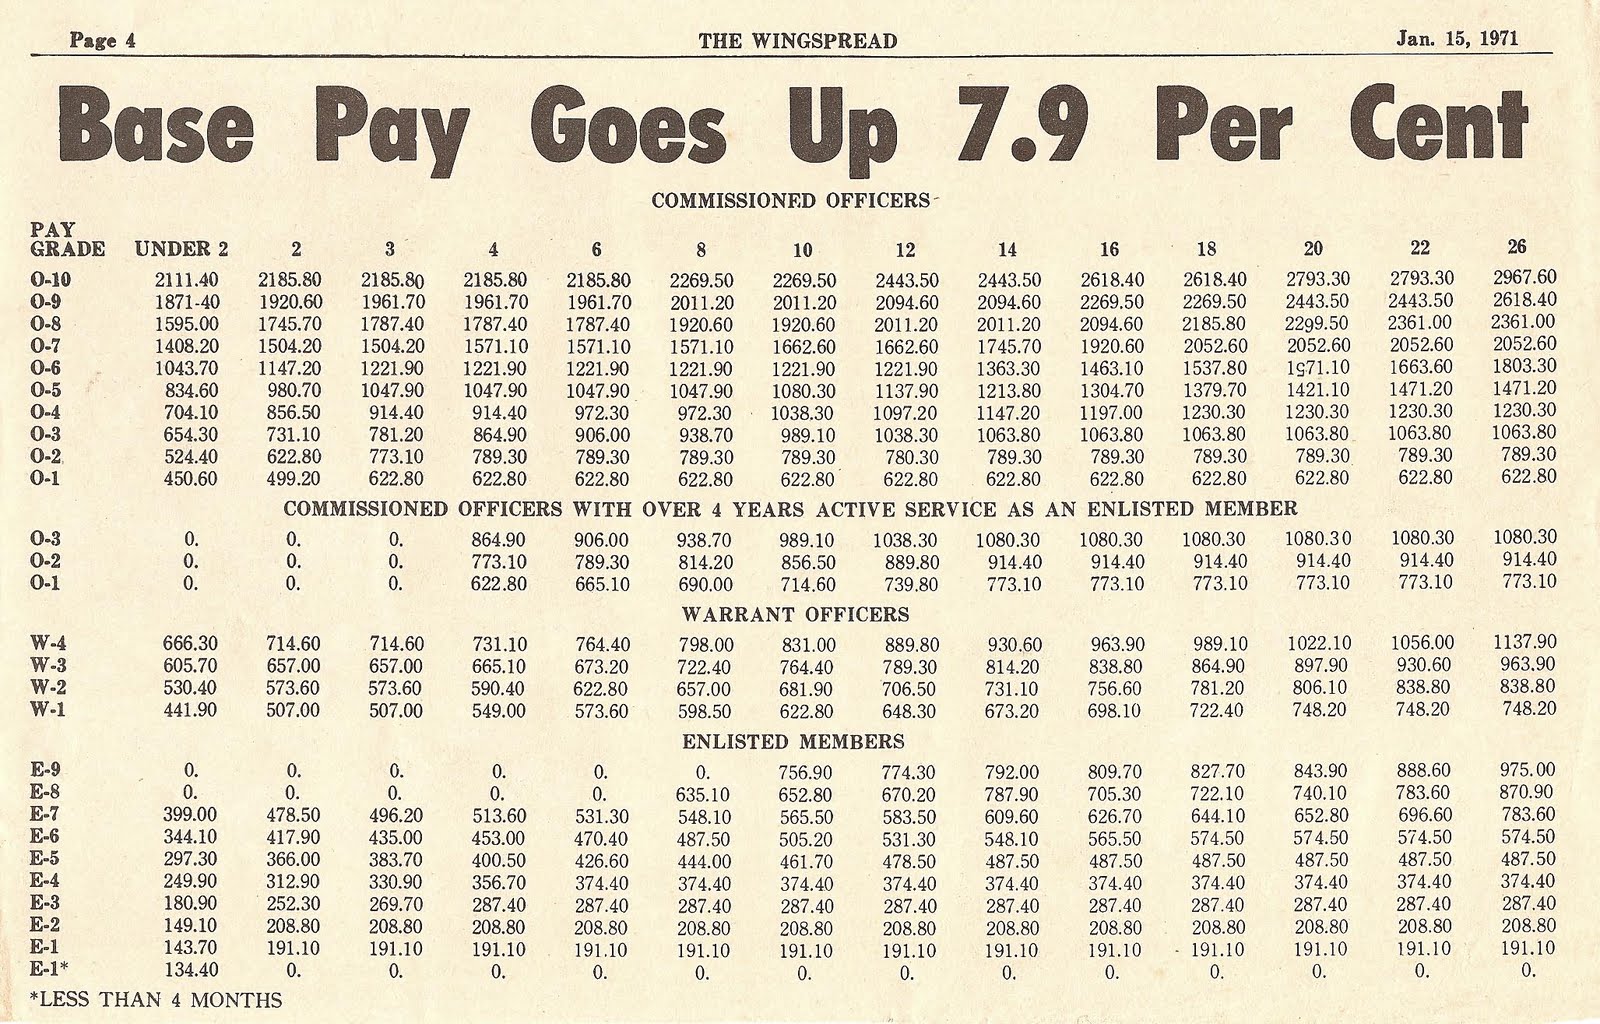 Military Pay Chart 2011 Air Force